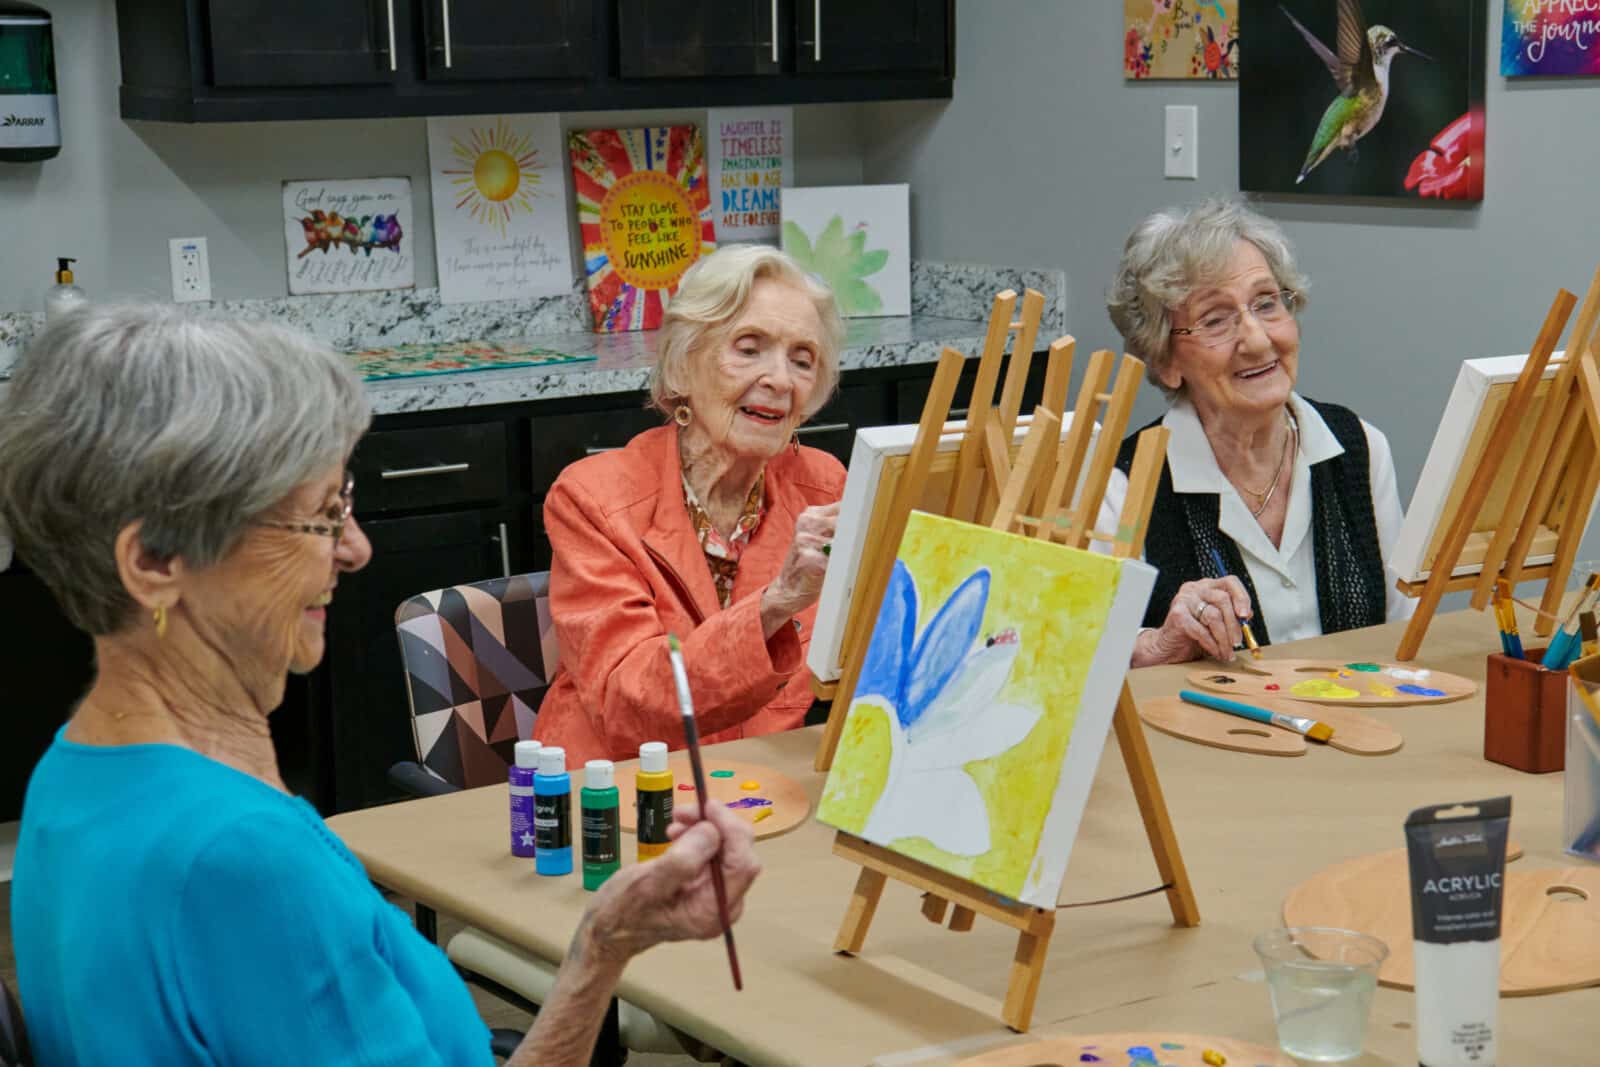 friends enjoying time together laughing and painting